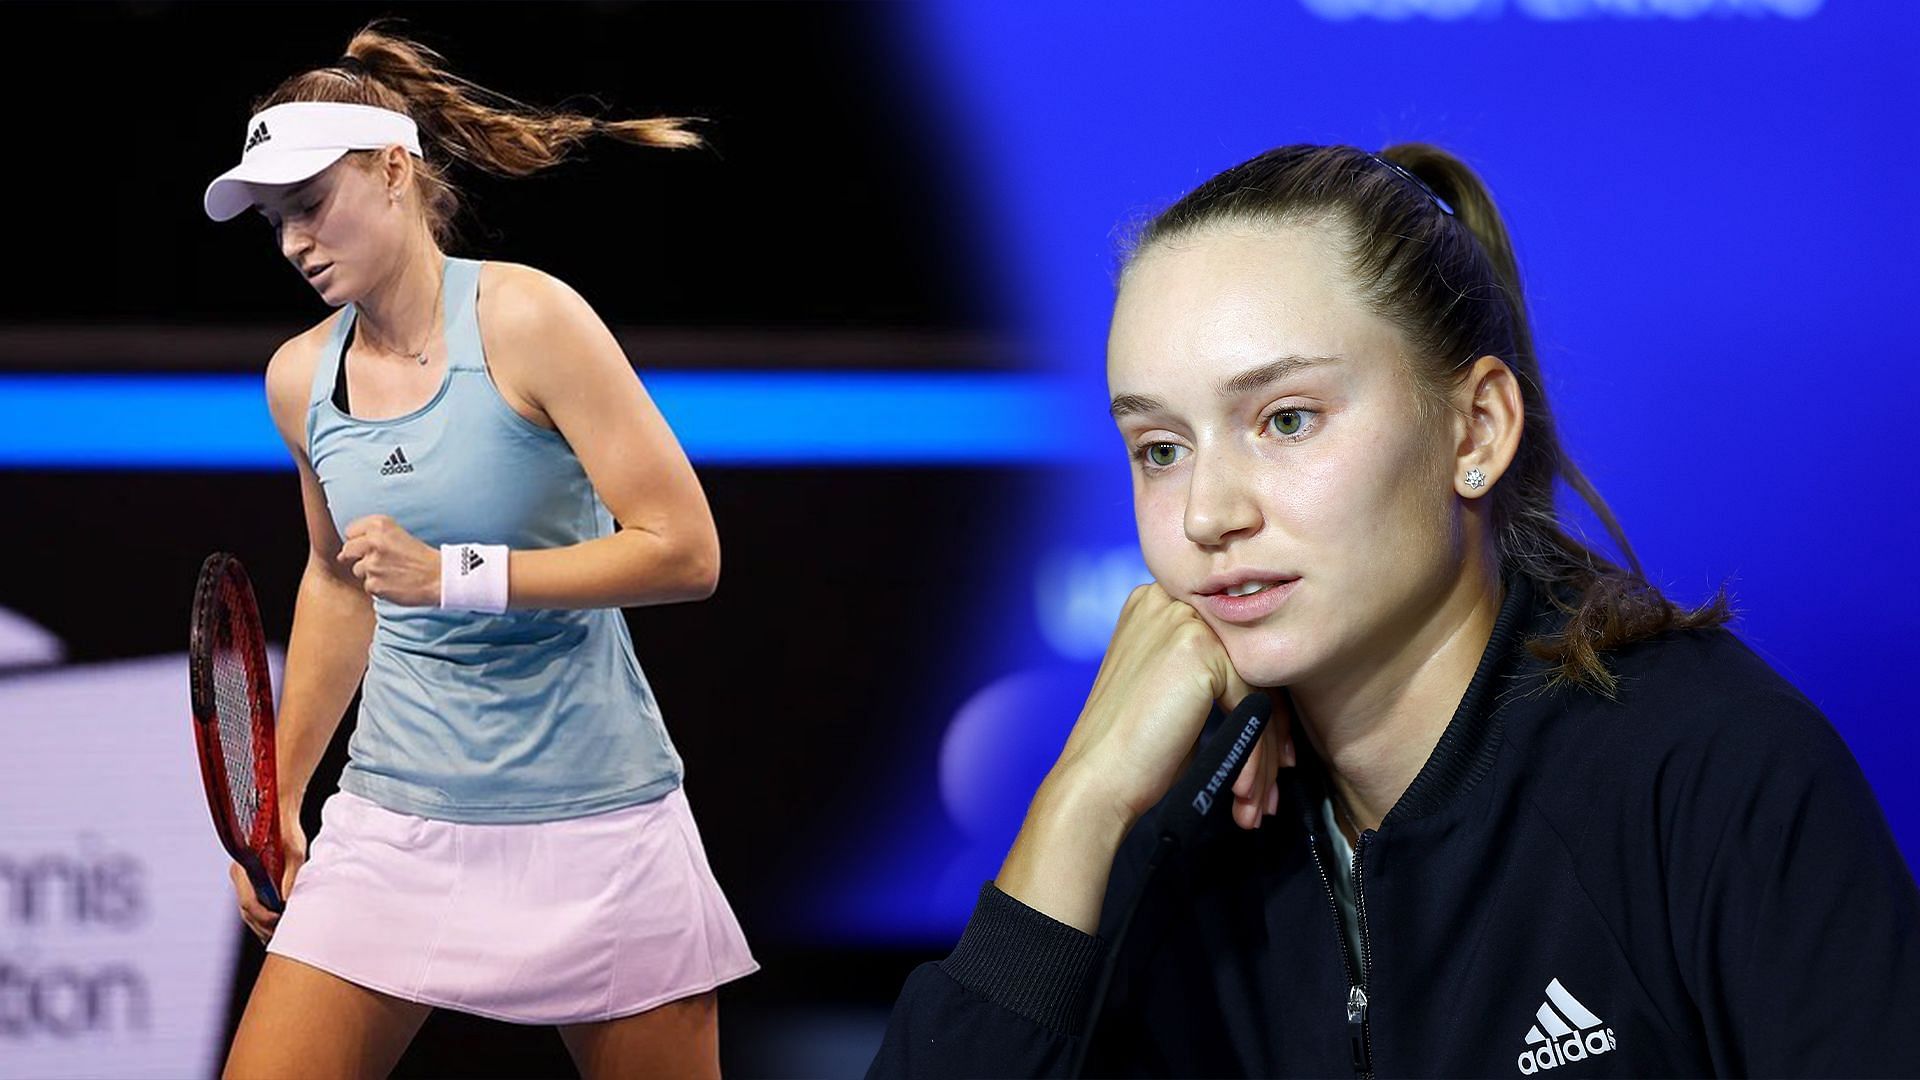 instant Menstruatie Gevlekt Adidas never respect players so not unexpected" - Tennis fans surprised by  Elena Rybakina sporting Yonex and Red Bull sponsorships after Adidas split